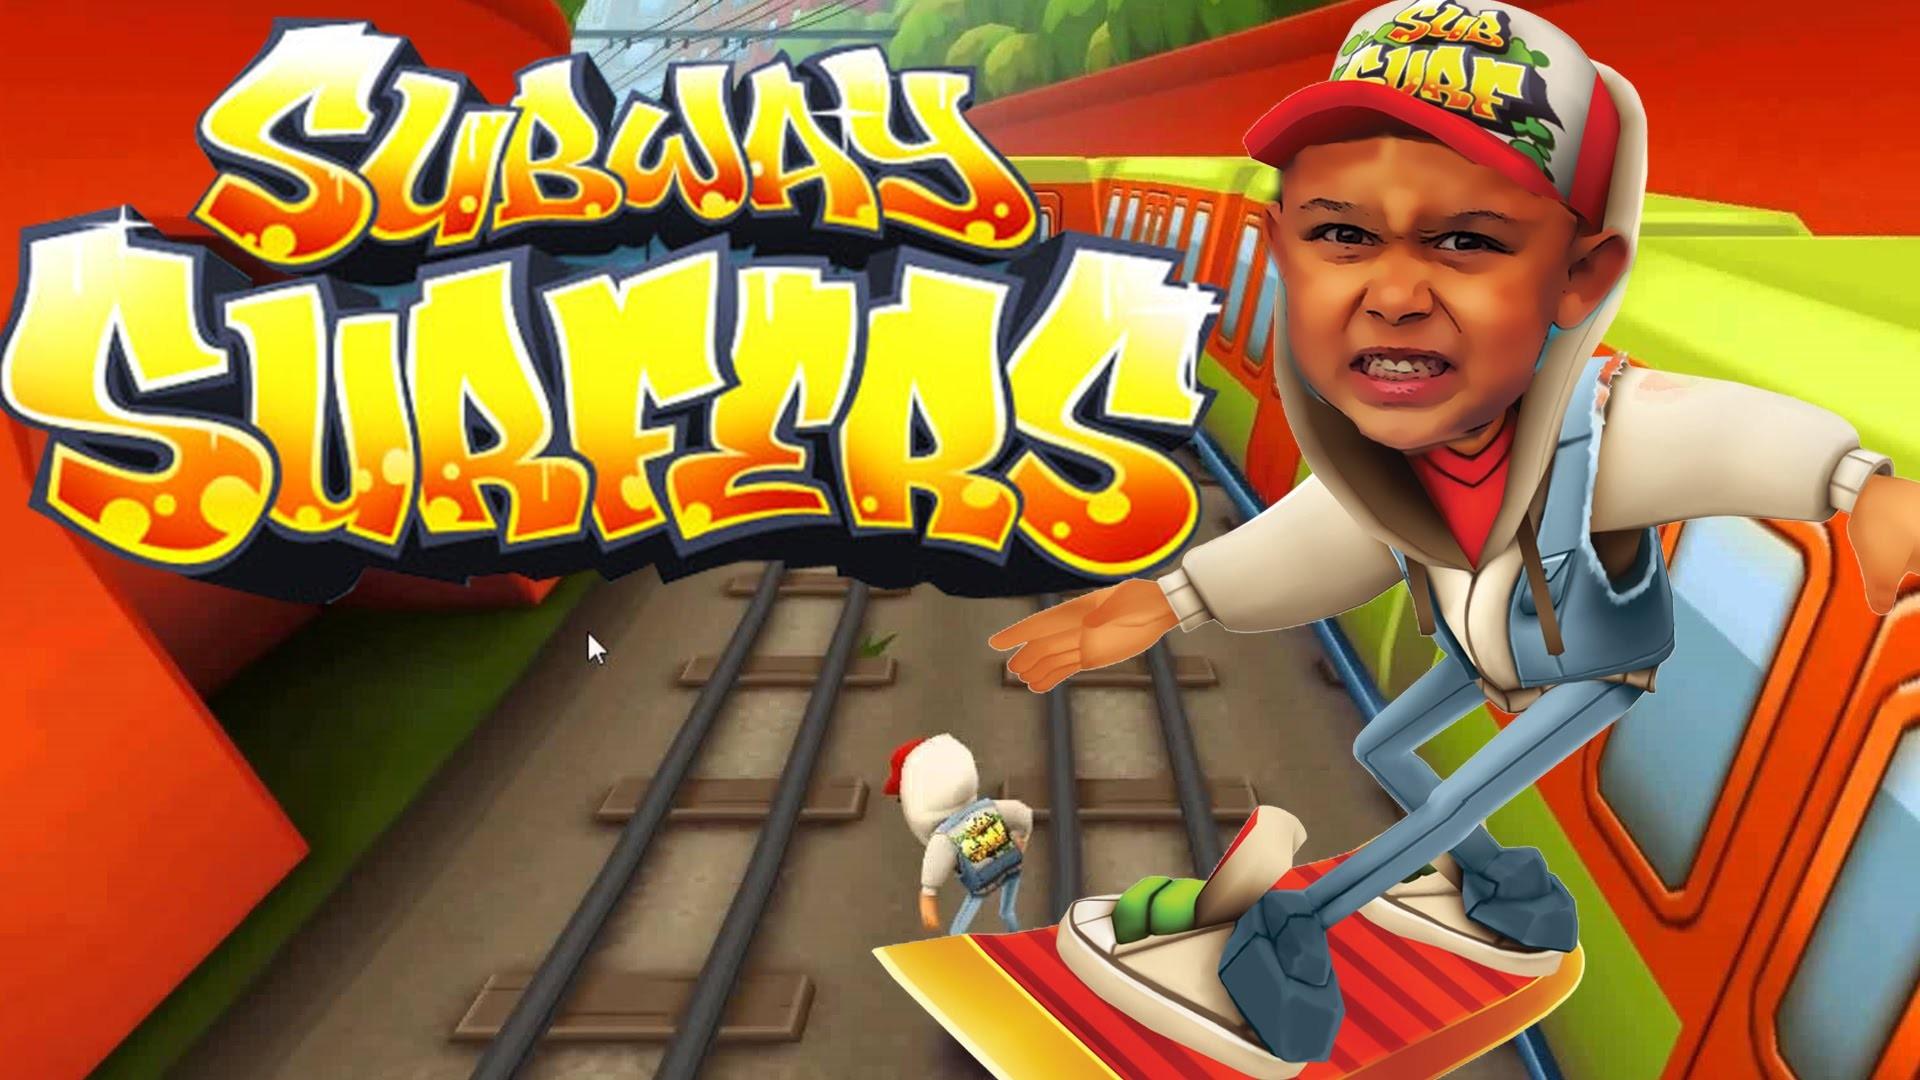 Subway surfers Wallpapers Download | MobCup